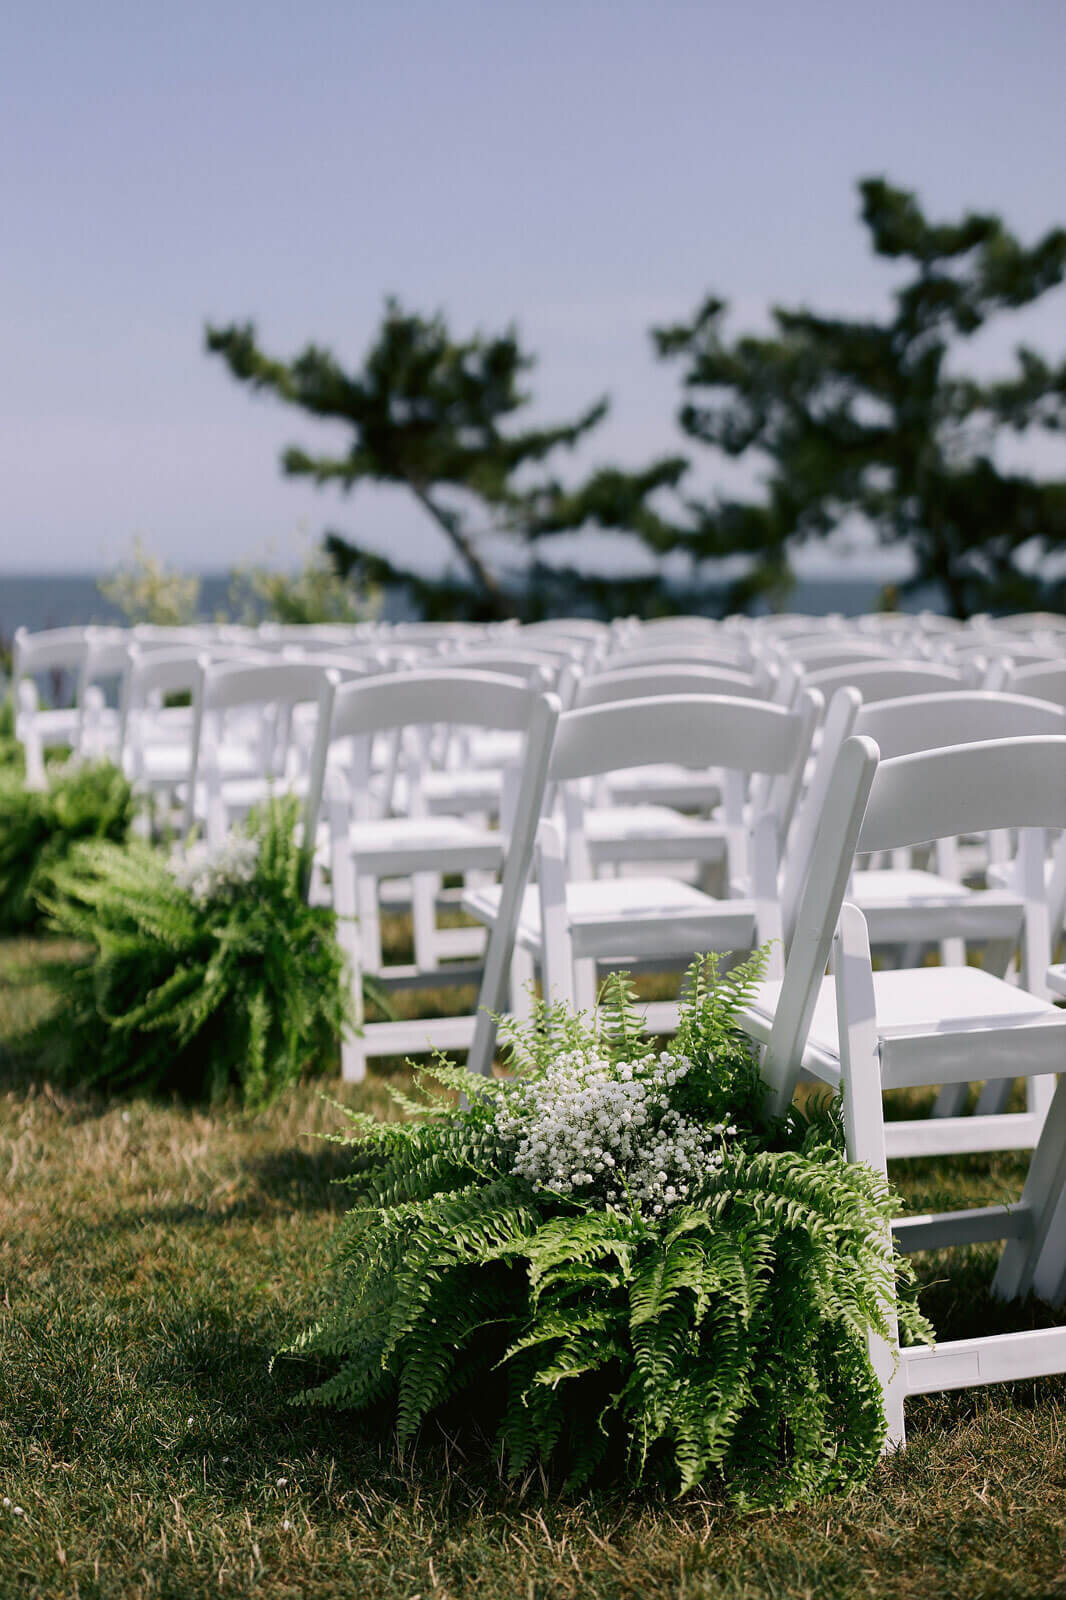 A bunch of ferns with small white flowers on top are placed on every end of a row of chairs in a wedding aisle at Cape Cod.